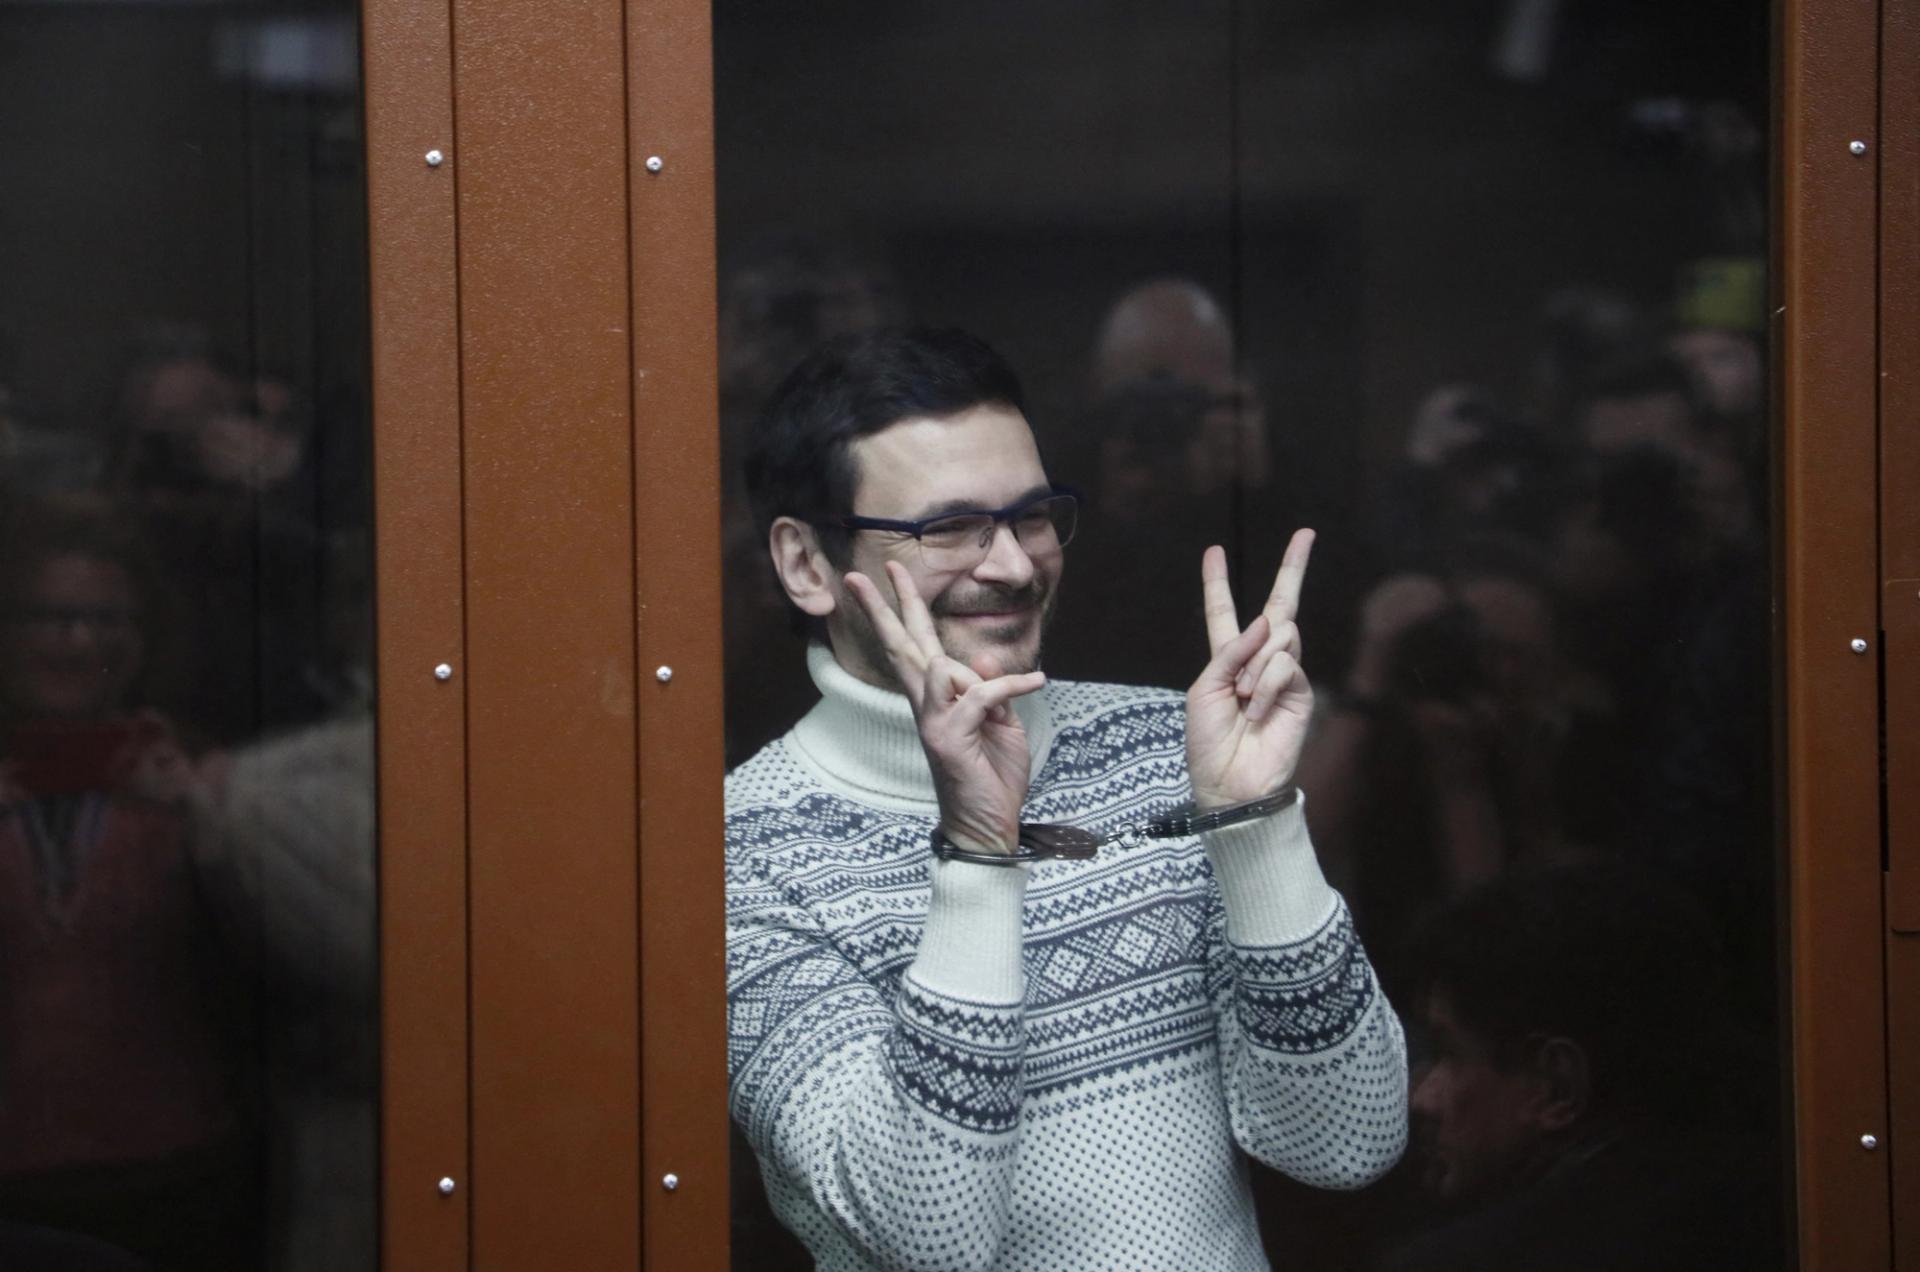 Russian opposition leader, former Moscow's municipal deputy Ilya Yashin gestures in a defendants' glass cage prior to a verdict hearing at the Meshchansky district court in Moscow, Russia, December 9, 2022. Prosecution requested nine years in prison for Yashin for spreading fake information about the Russian army. 